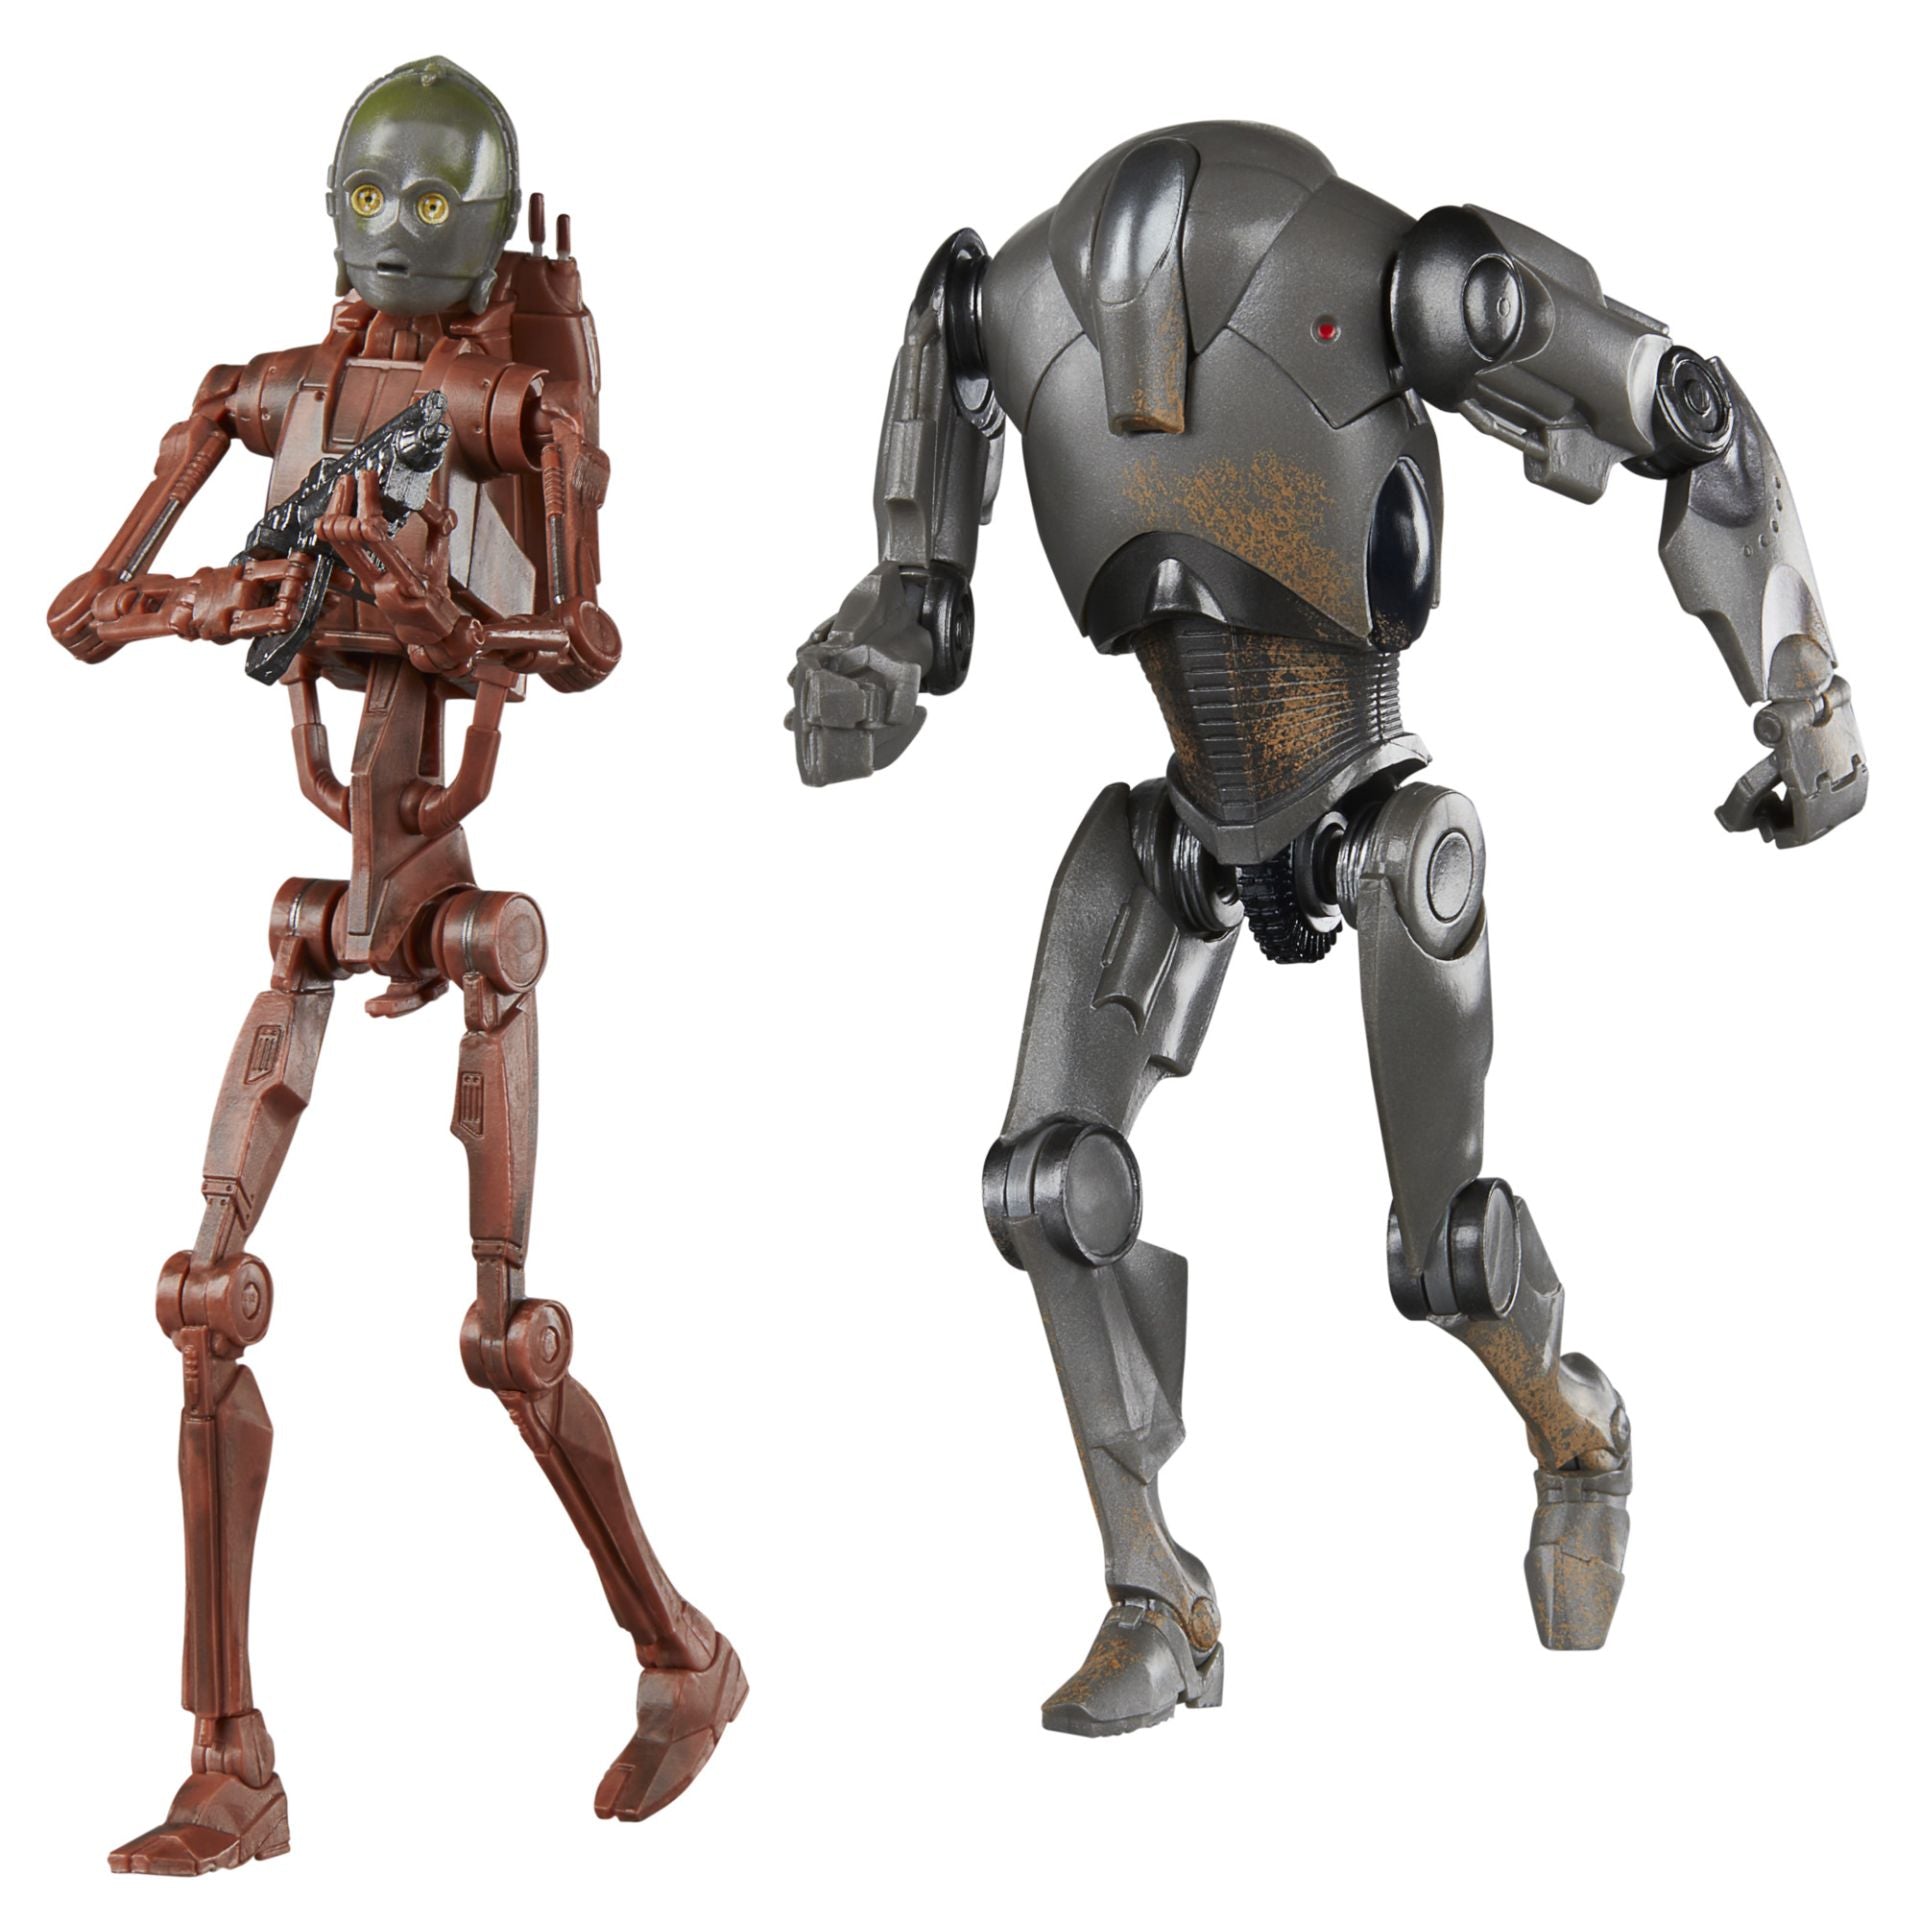 Star Wars Black Series 6" Attack of the Clones C-3PO & Super Battle Droid 2 Pack